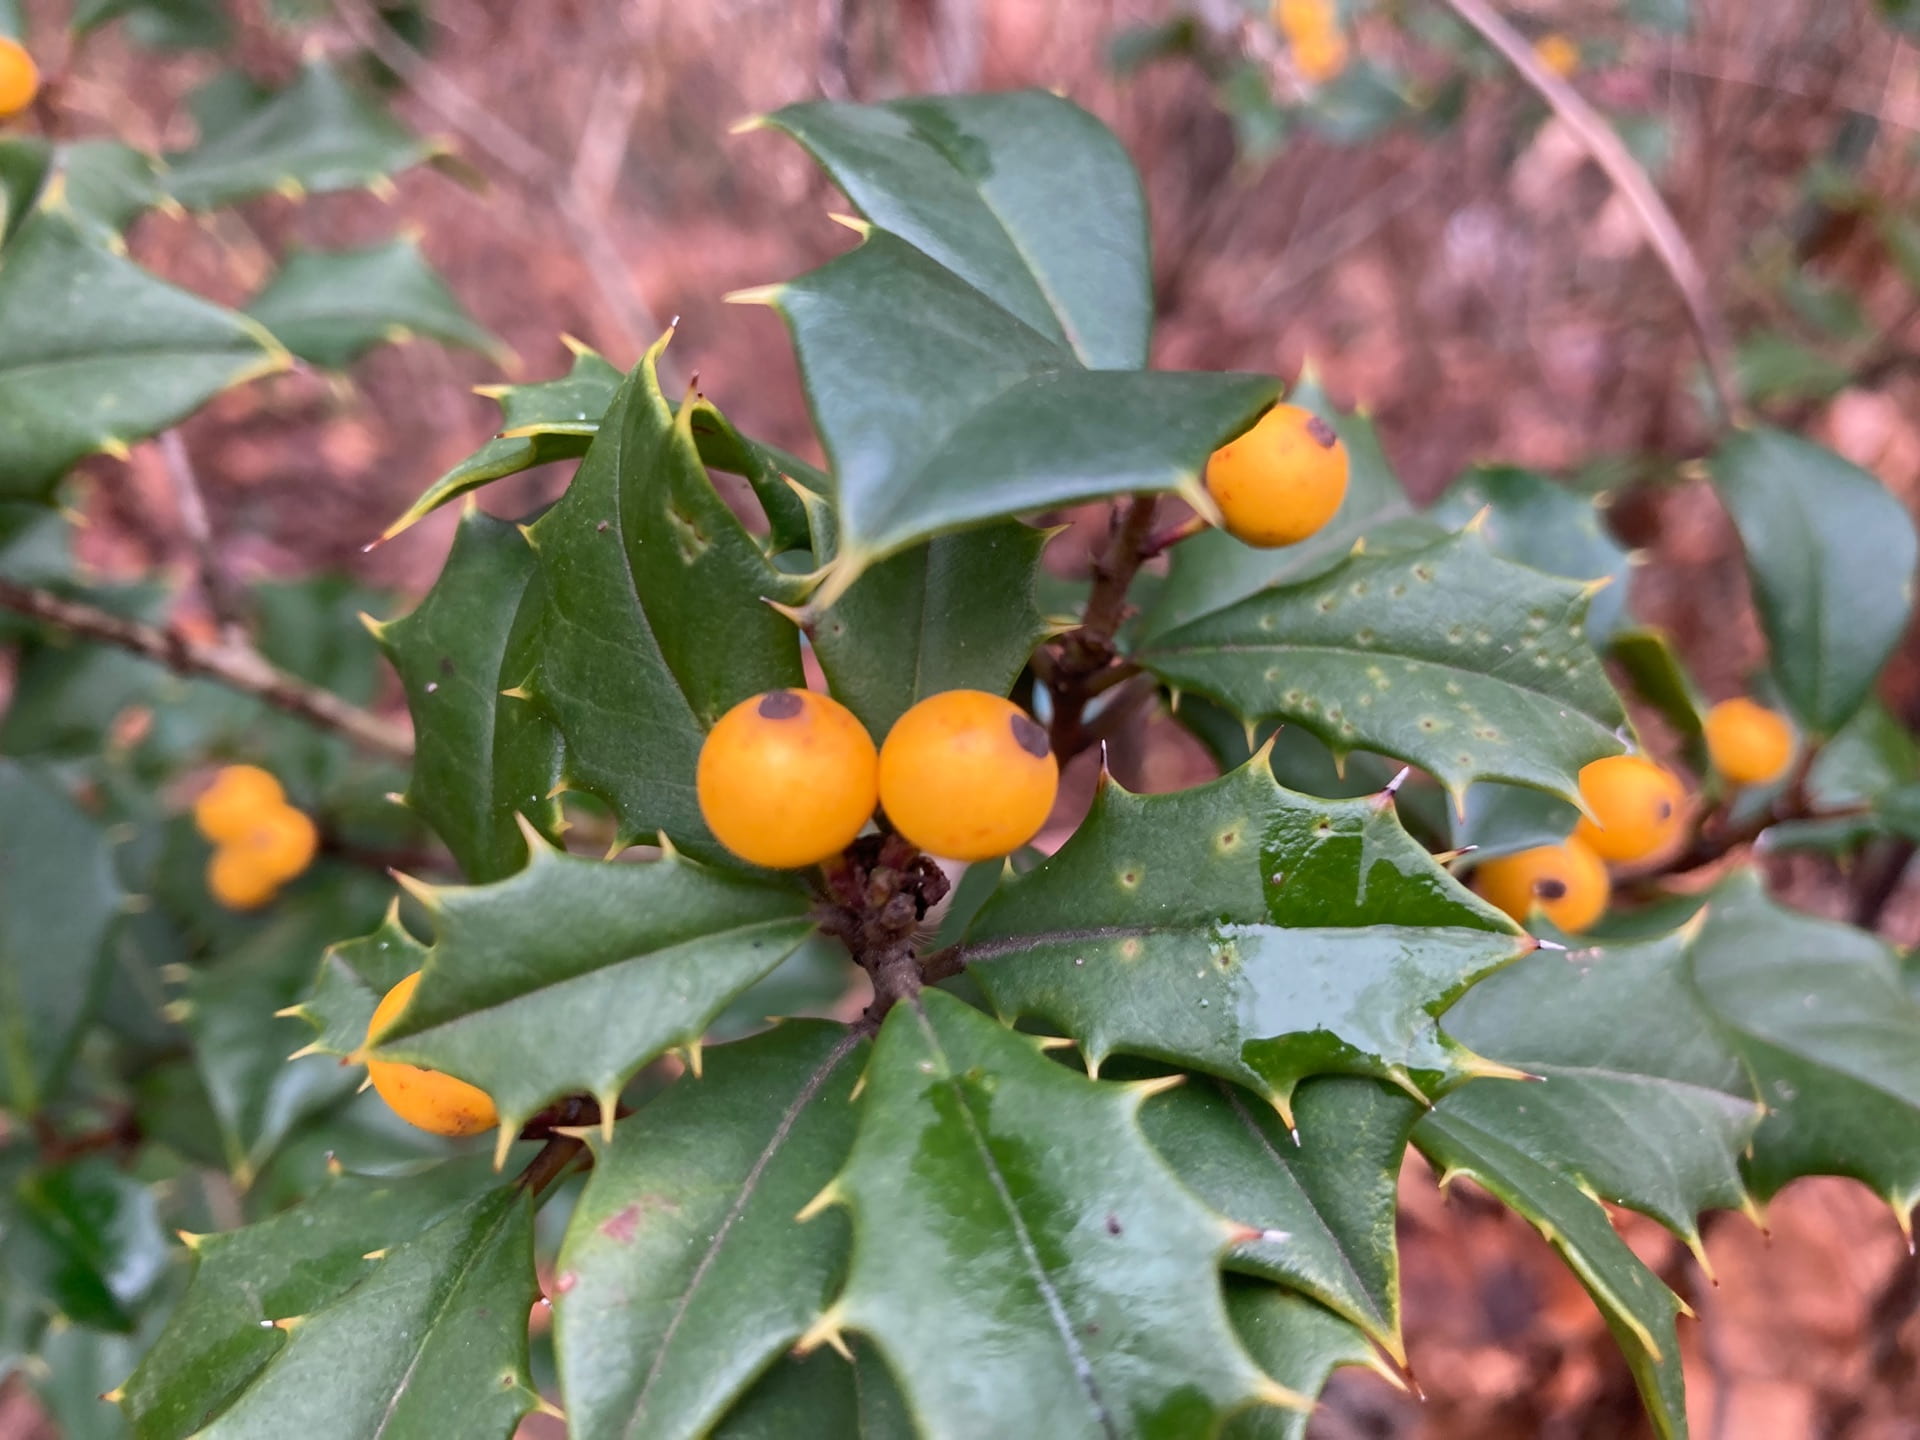 Ilex opaca 'Princeton Gold' differentiates itself from the straight species with its yellow fruits.